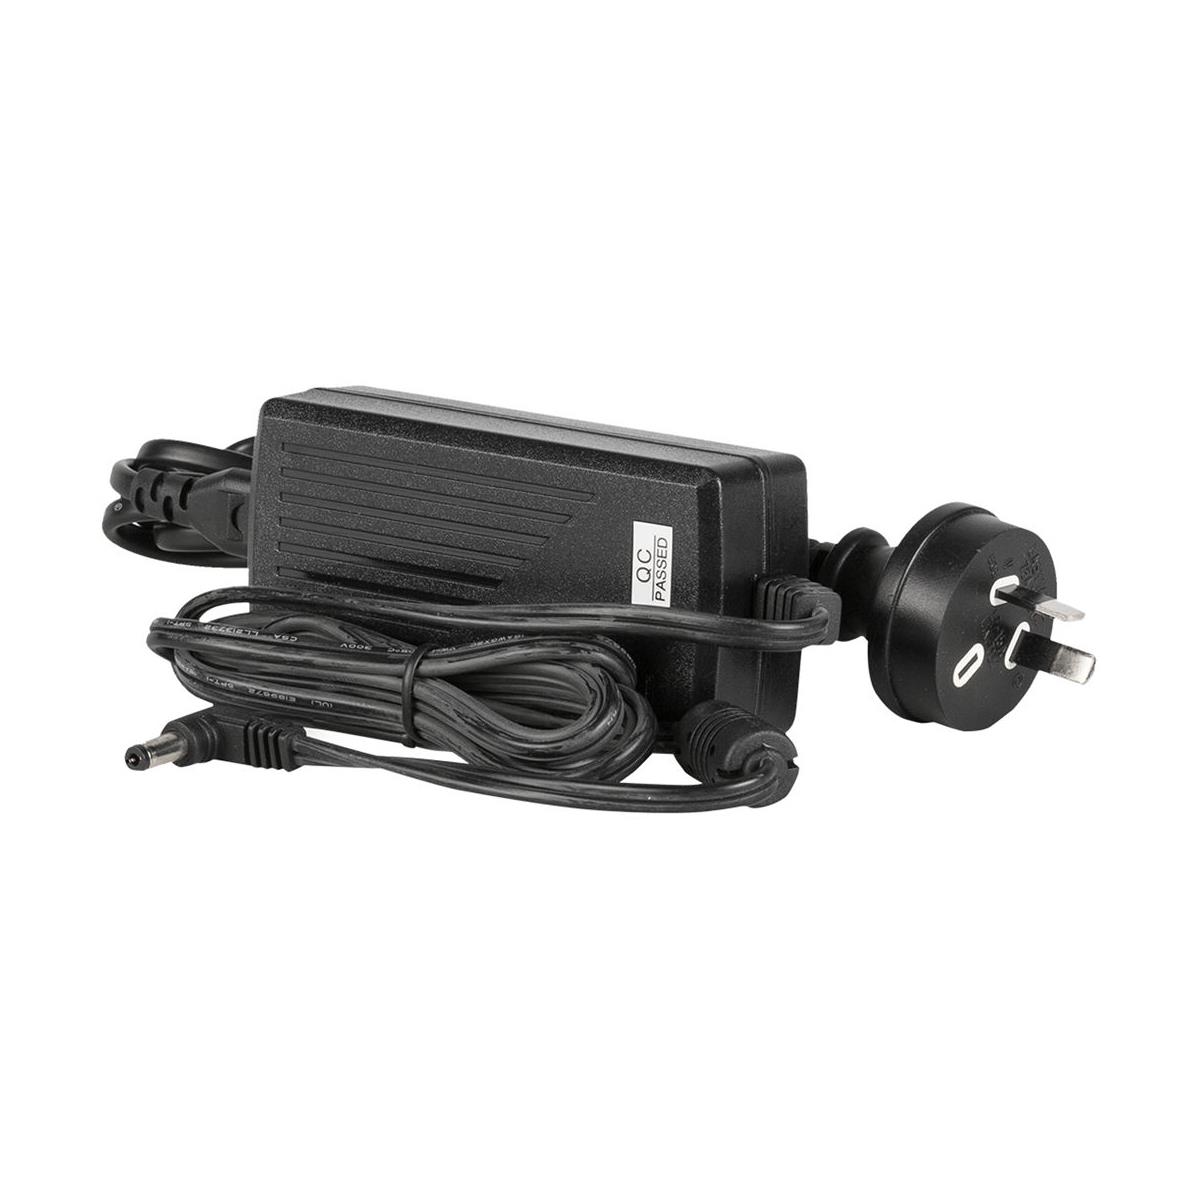 Image of Ikan 12V 4Amp AC Adapter for Australian Power Systems